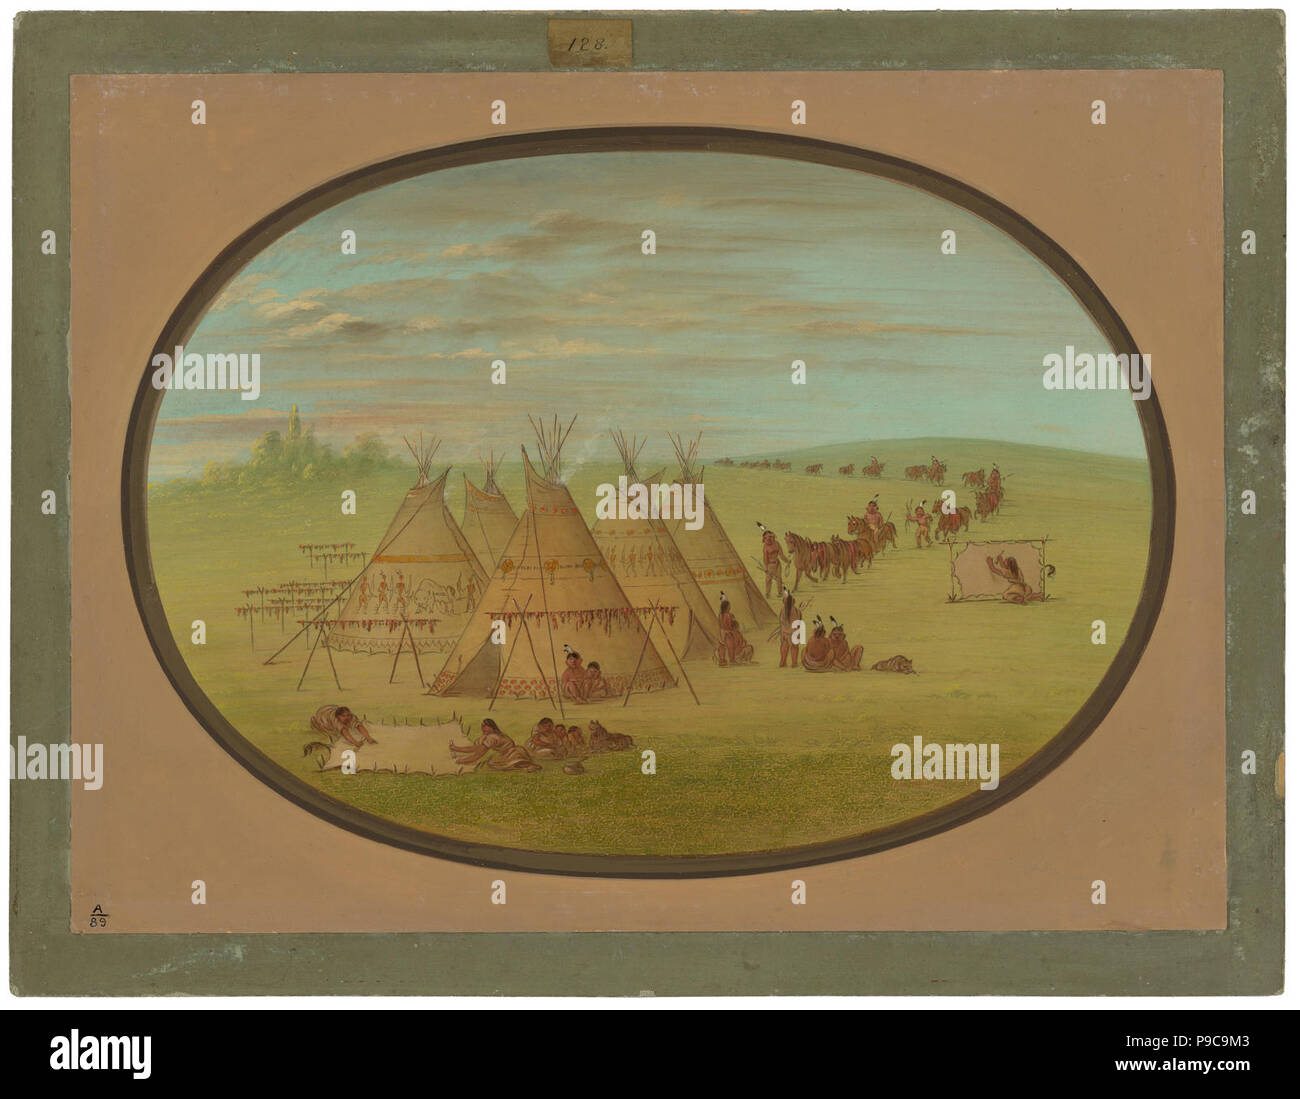 A Little Sioux Village C16162. George Catlin, A Little Sioux Village, American, 1796 - 1872, 1861/1869, oil on card mounted on paperboard, Stock Photo